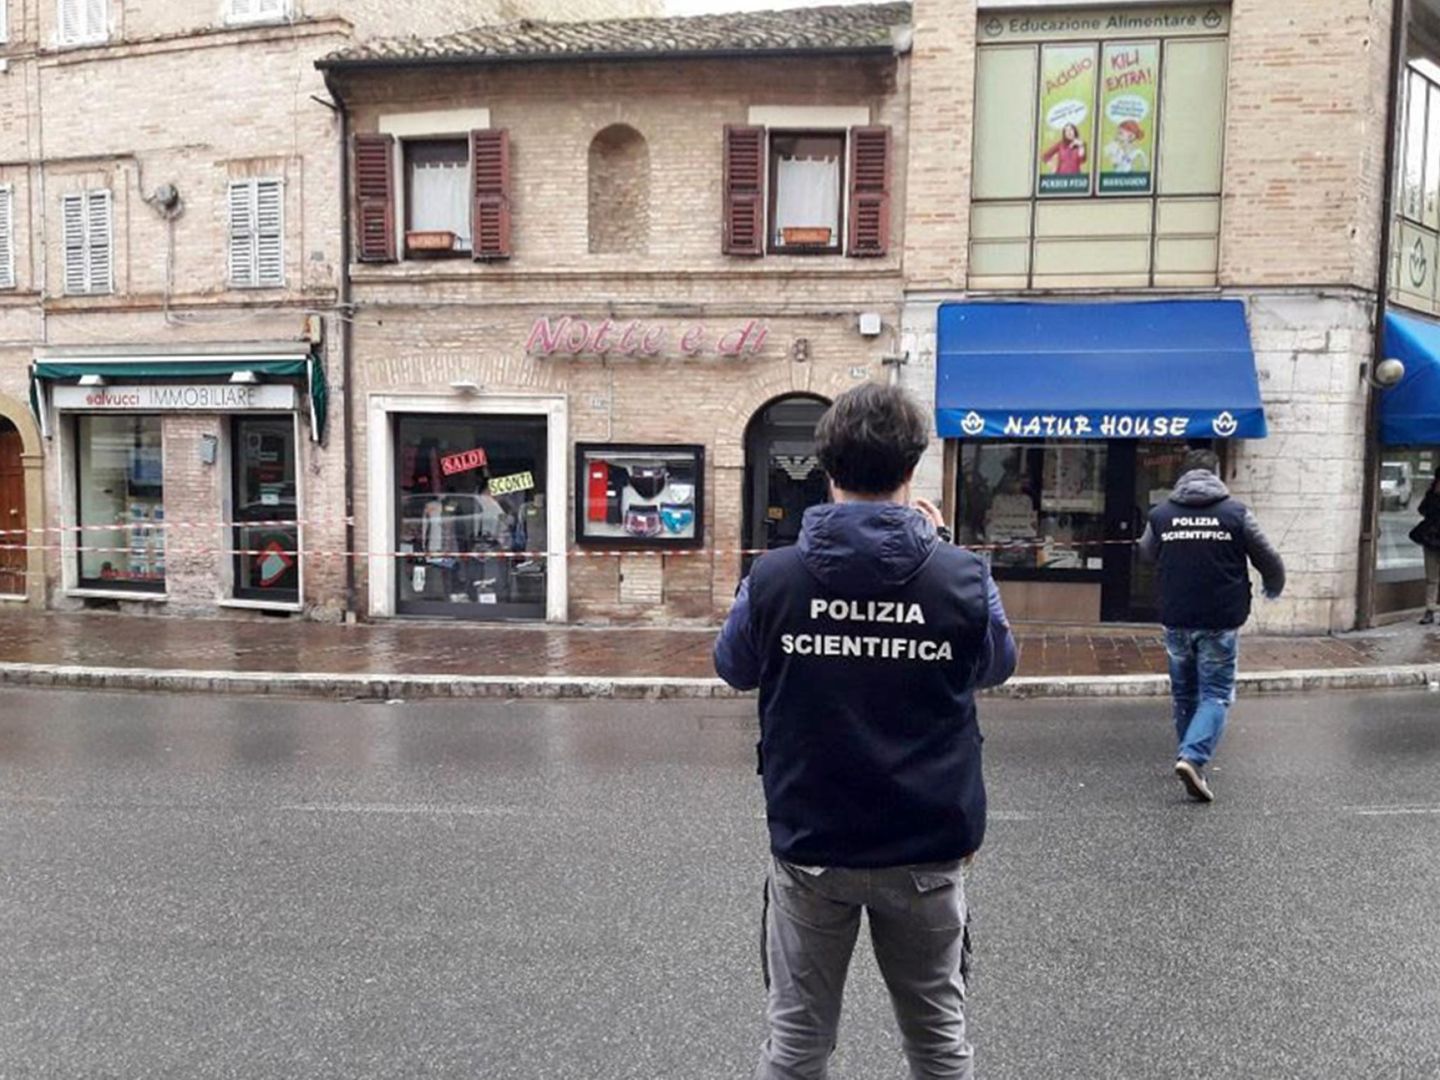 Macerata (Italy), 03 02 2018.- Crime scene investigators work at the scene of crime after a shooting in Macerata, Italy, 03 February 2018. Italian nationalist Luca Traini confessed opening fire on African migrants in the central city of Macerata, injuring several people, police said, in an attack that appeared to be racially motivated. The town at the eastern Italian coast near Ancona was put under a lockdown due to shots being fired from a car driving around in the town. (Abierto, Atentado, Incendio, Italia) EFE EPA CAROTTI NEST QUALITY AVAILABLE